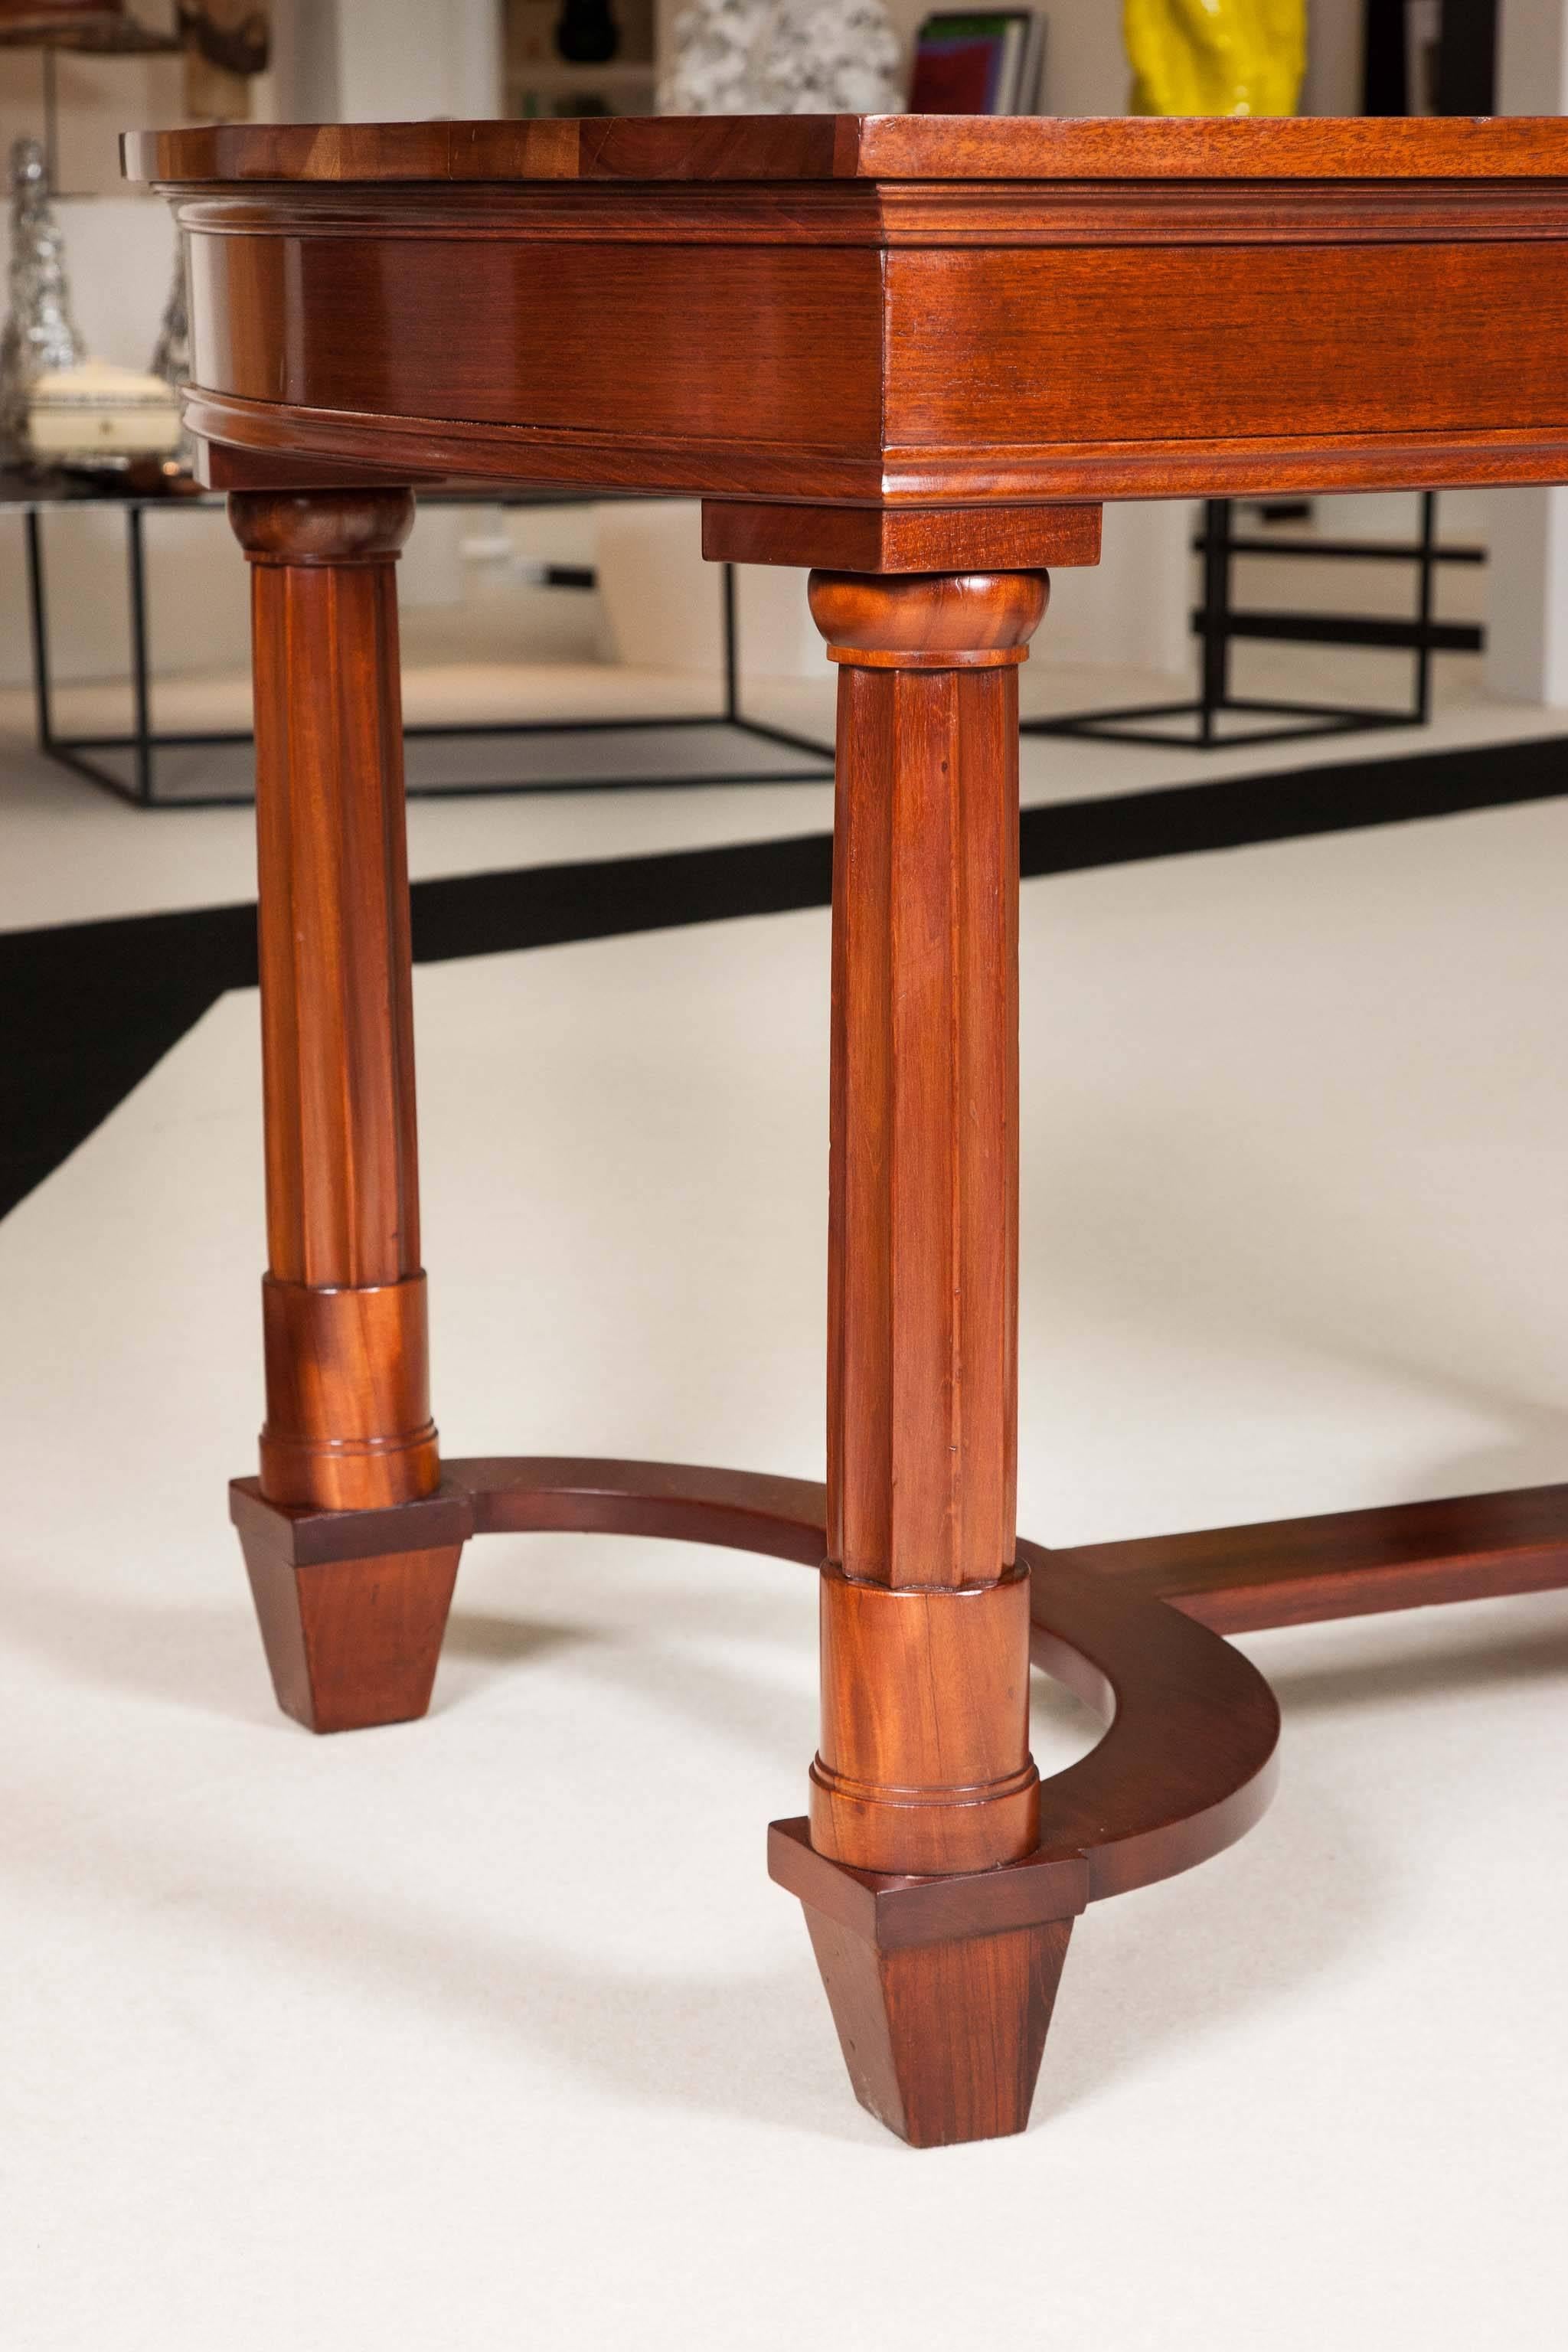 A pair of neoclassical mahogany library tables with legs in the form of fluted columns by Nordisk Kunst & Mo¨bel-Etablissement of Copenhagen.

Makers label to the underside: Dated 1917. (18/5. 17.) No: 1545.

